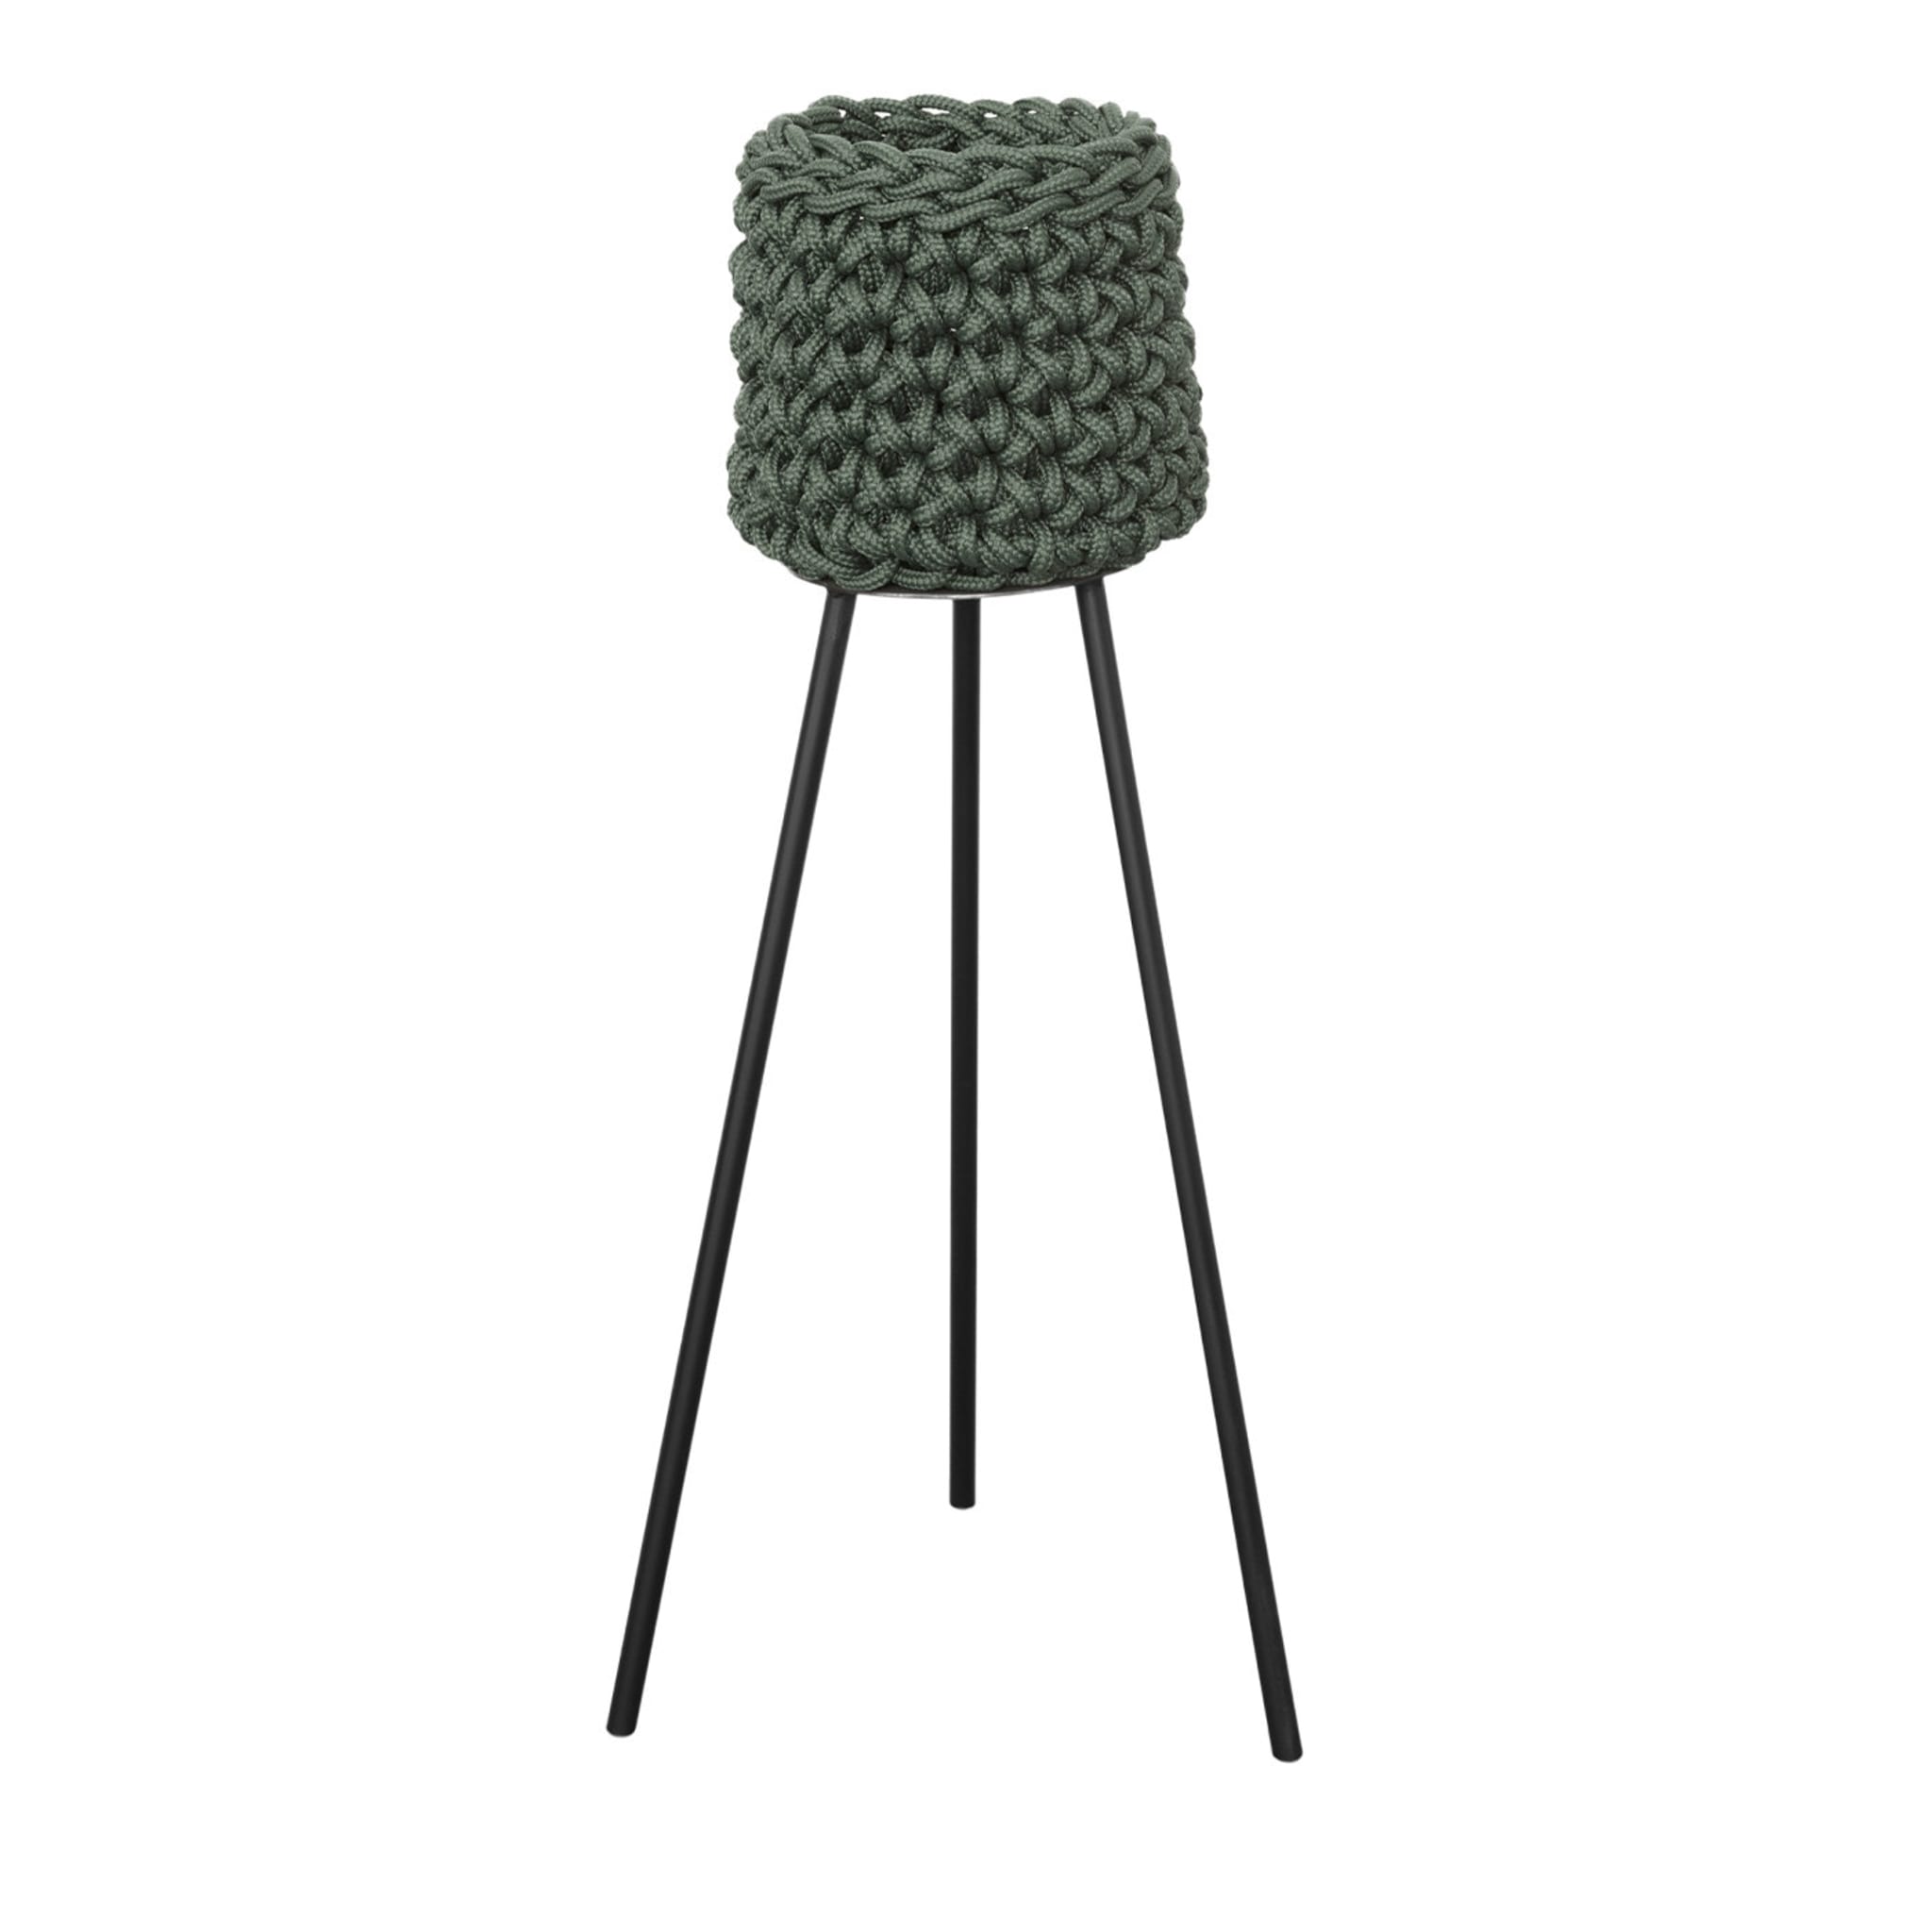 Le Rossette Olive Green Potholder Stand - Main view